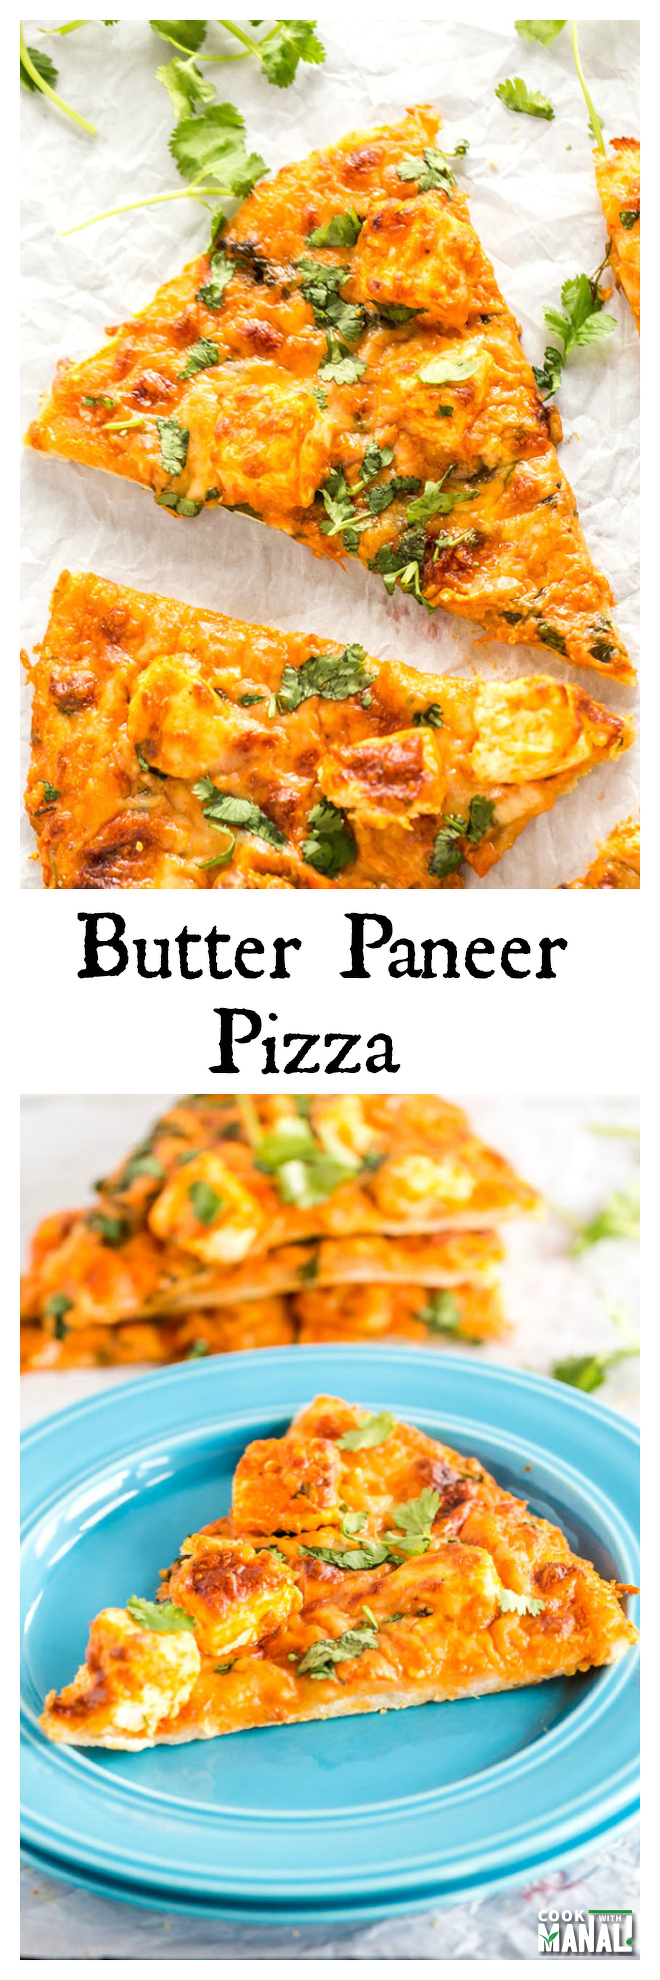 Butter Paneer Pizza Collage